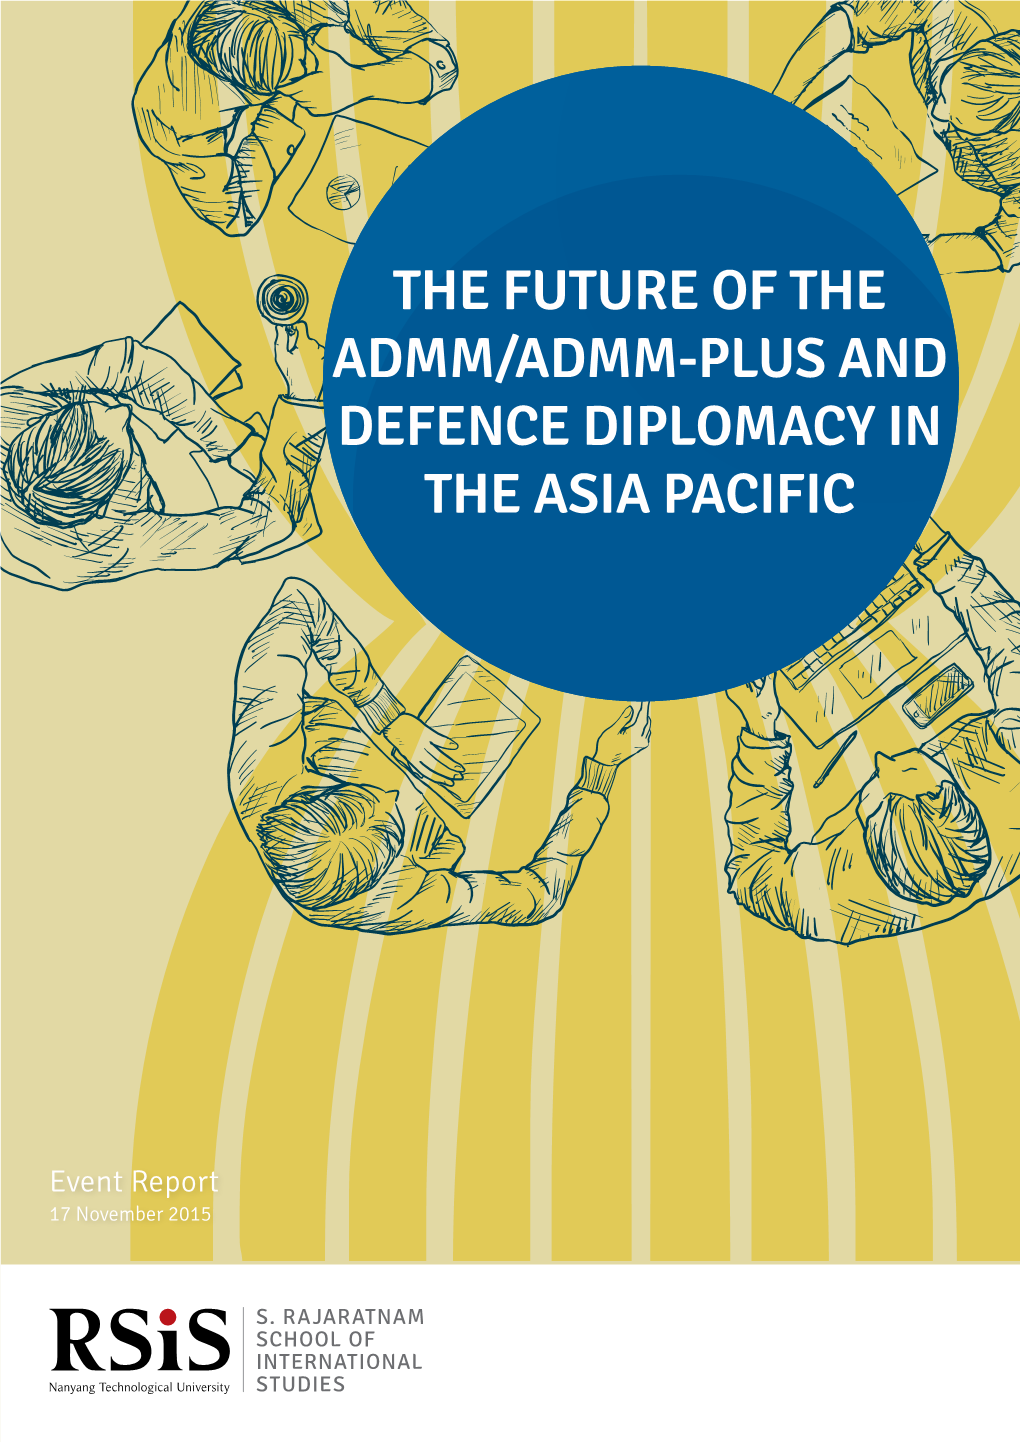 The Future of the Admm/Admm-Plus and Defence Diplomacy in the Asia Pacific